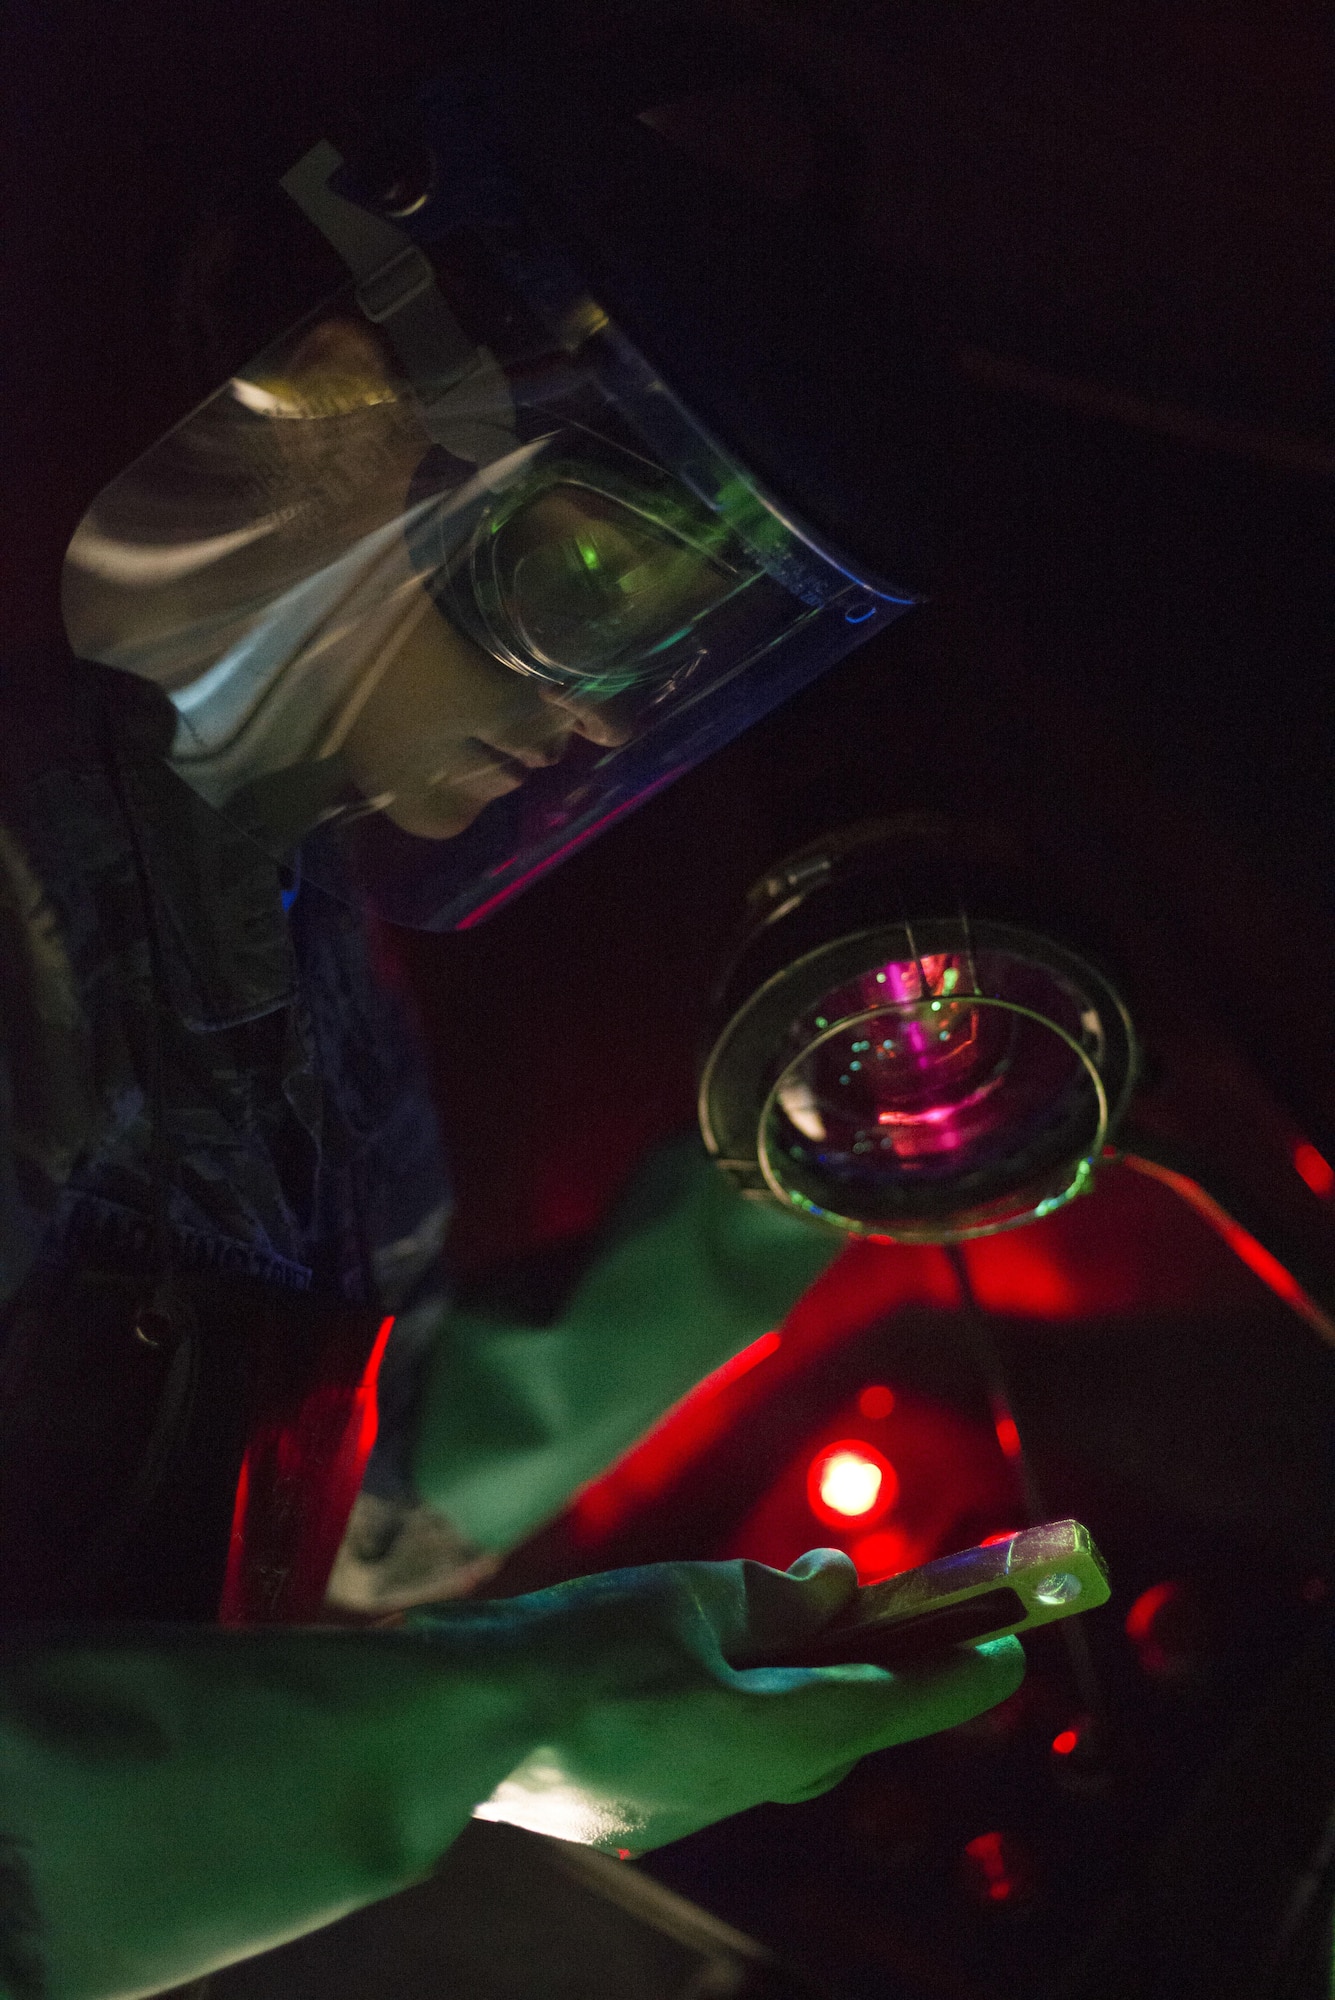 Airman 1st Class Danielle Harrington, a 2nd Maintenance Squadron nondestructive inspection apprentice, uses a black light to find cracks on a part at Barksdale Air Force Base, La., July 21, 2015. The black light and magnetic particle solution combine to enable technicians to evaluate defects in aircraft and equipment parts. (U.S. Air Force photo/Senior Airman Jannelle Dickey)